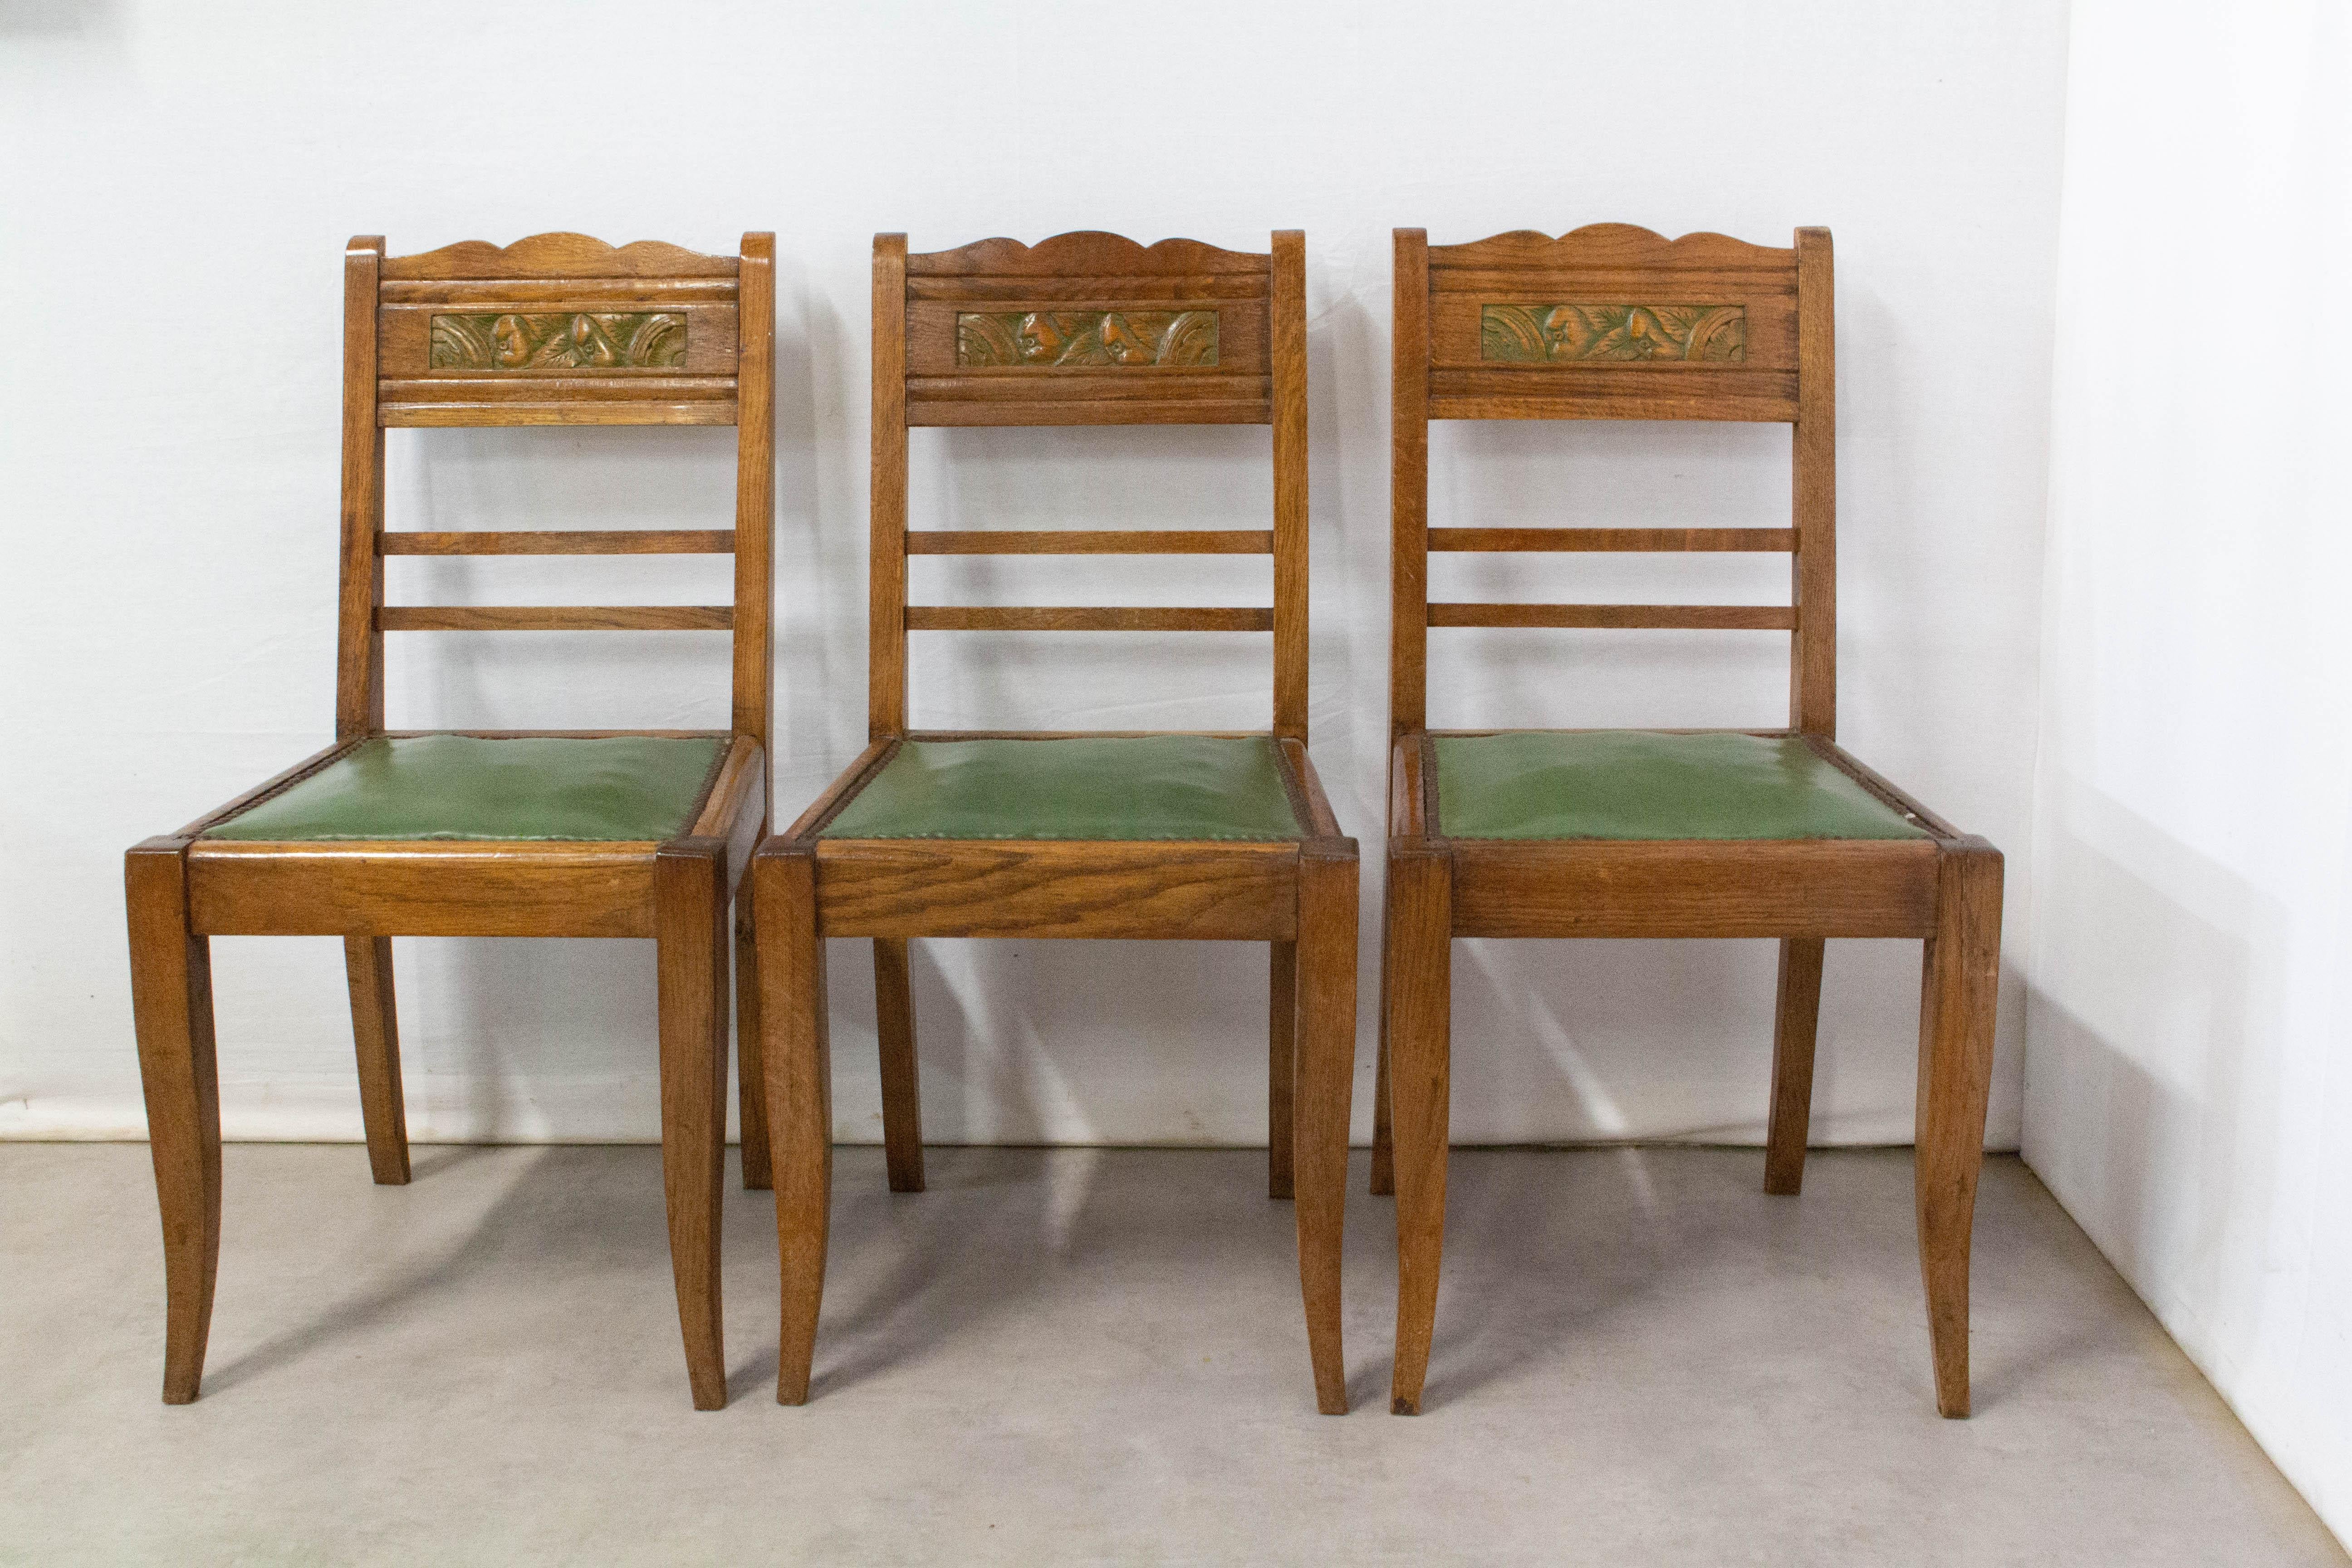 Six French Art Deco dining chairs with stylised flower on the back
Solid oak, circa 1940
Can be re-upholstered to suit your interior by our upholsterer if you wish.
Good vintage condition
Frames are sound and solid.

For shipping:
3